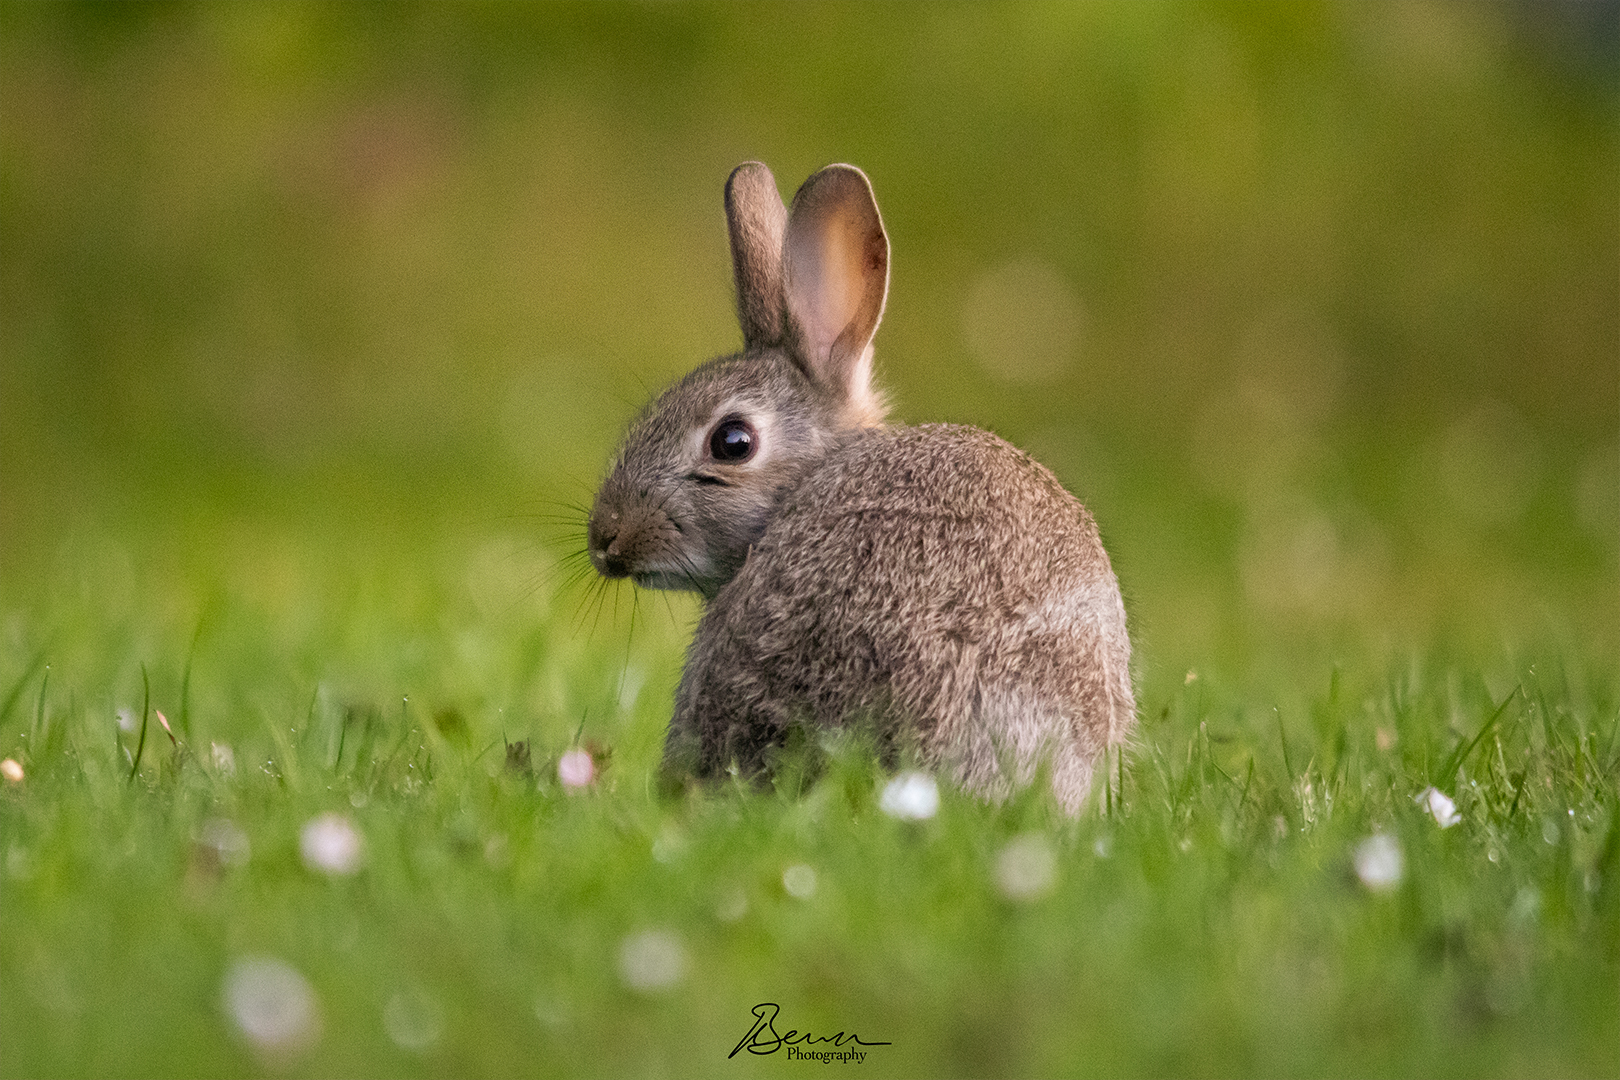 “Dawn rabbit”. A rabbit with morning dew on its nose after sniffing around at dawn for the freshest of grass to nibble on.